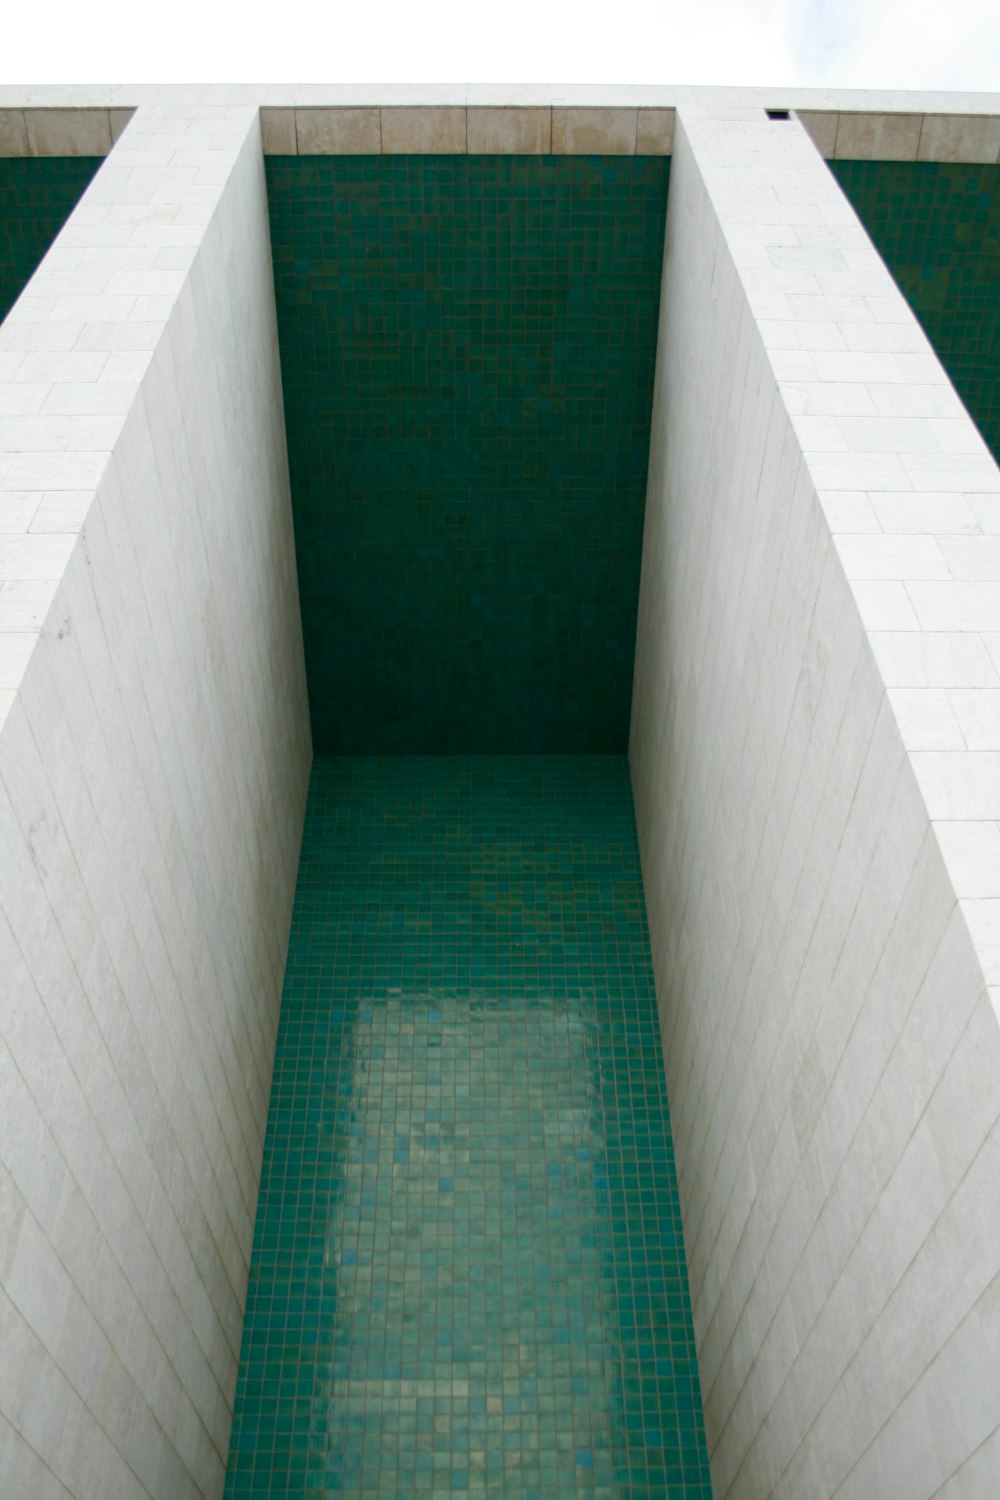 a small pool in the middle of a building